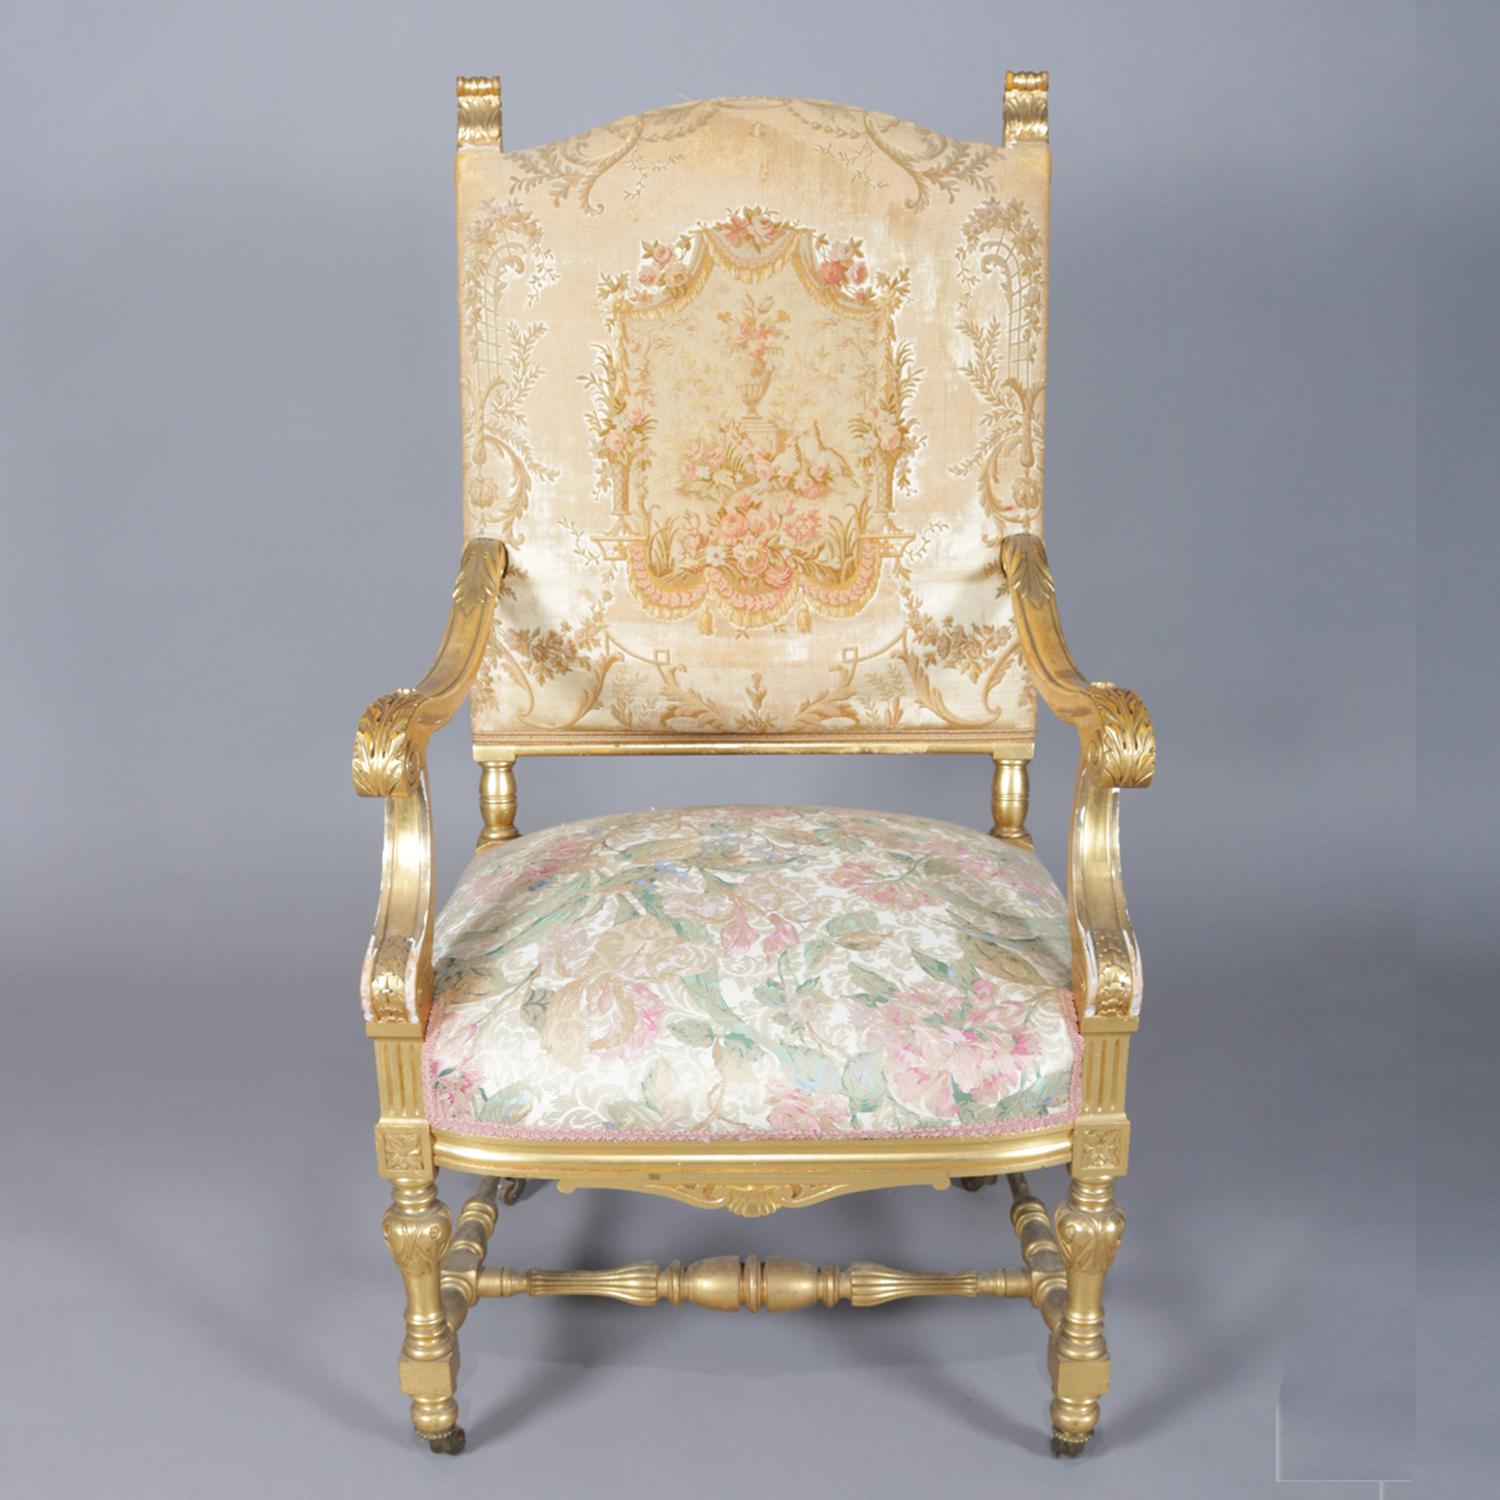 Antique French Louis XIV throne chair features carved giltwood frame having scroll and acanthus form arms, tapestry upholstery with urn and garden motif, seated on casters, 19th century

Measures: 47.5